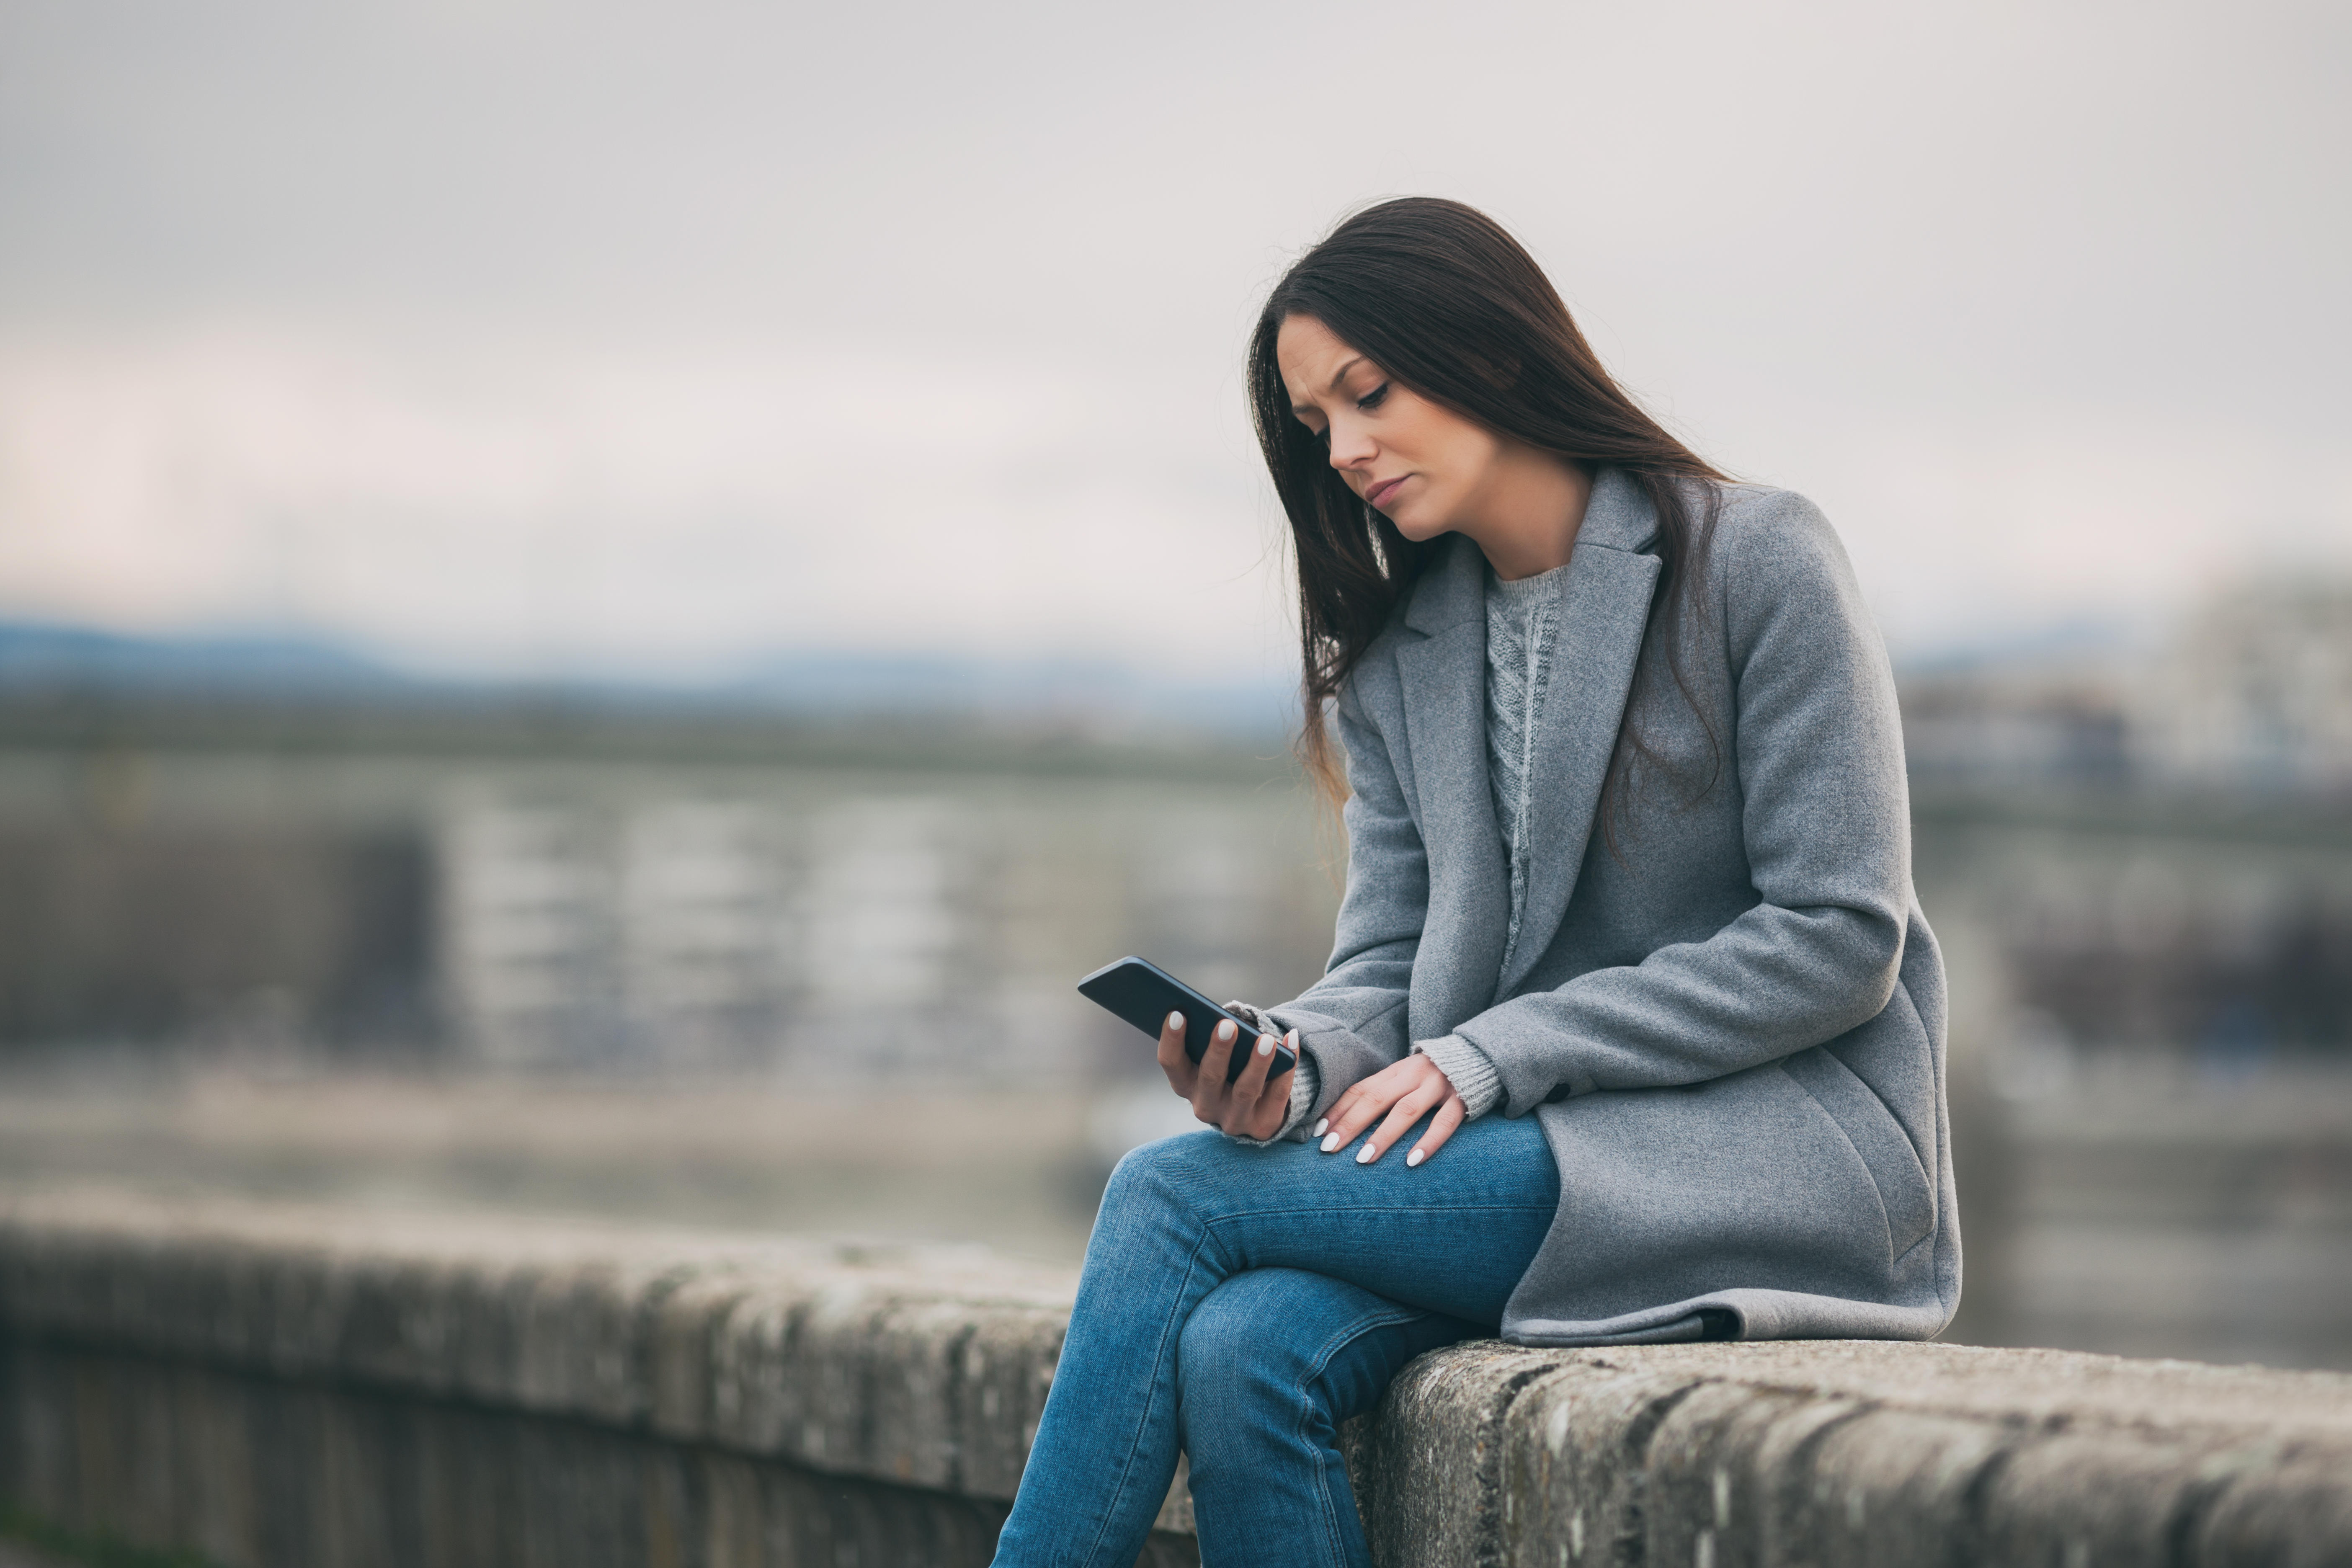 Woman sat on a wall looking at phone